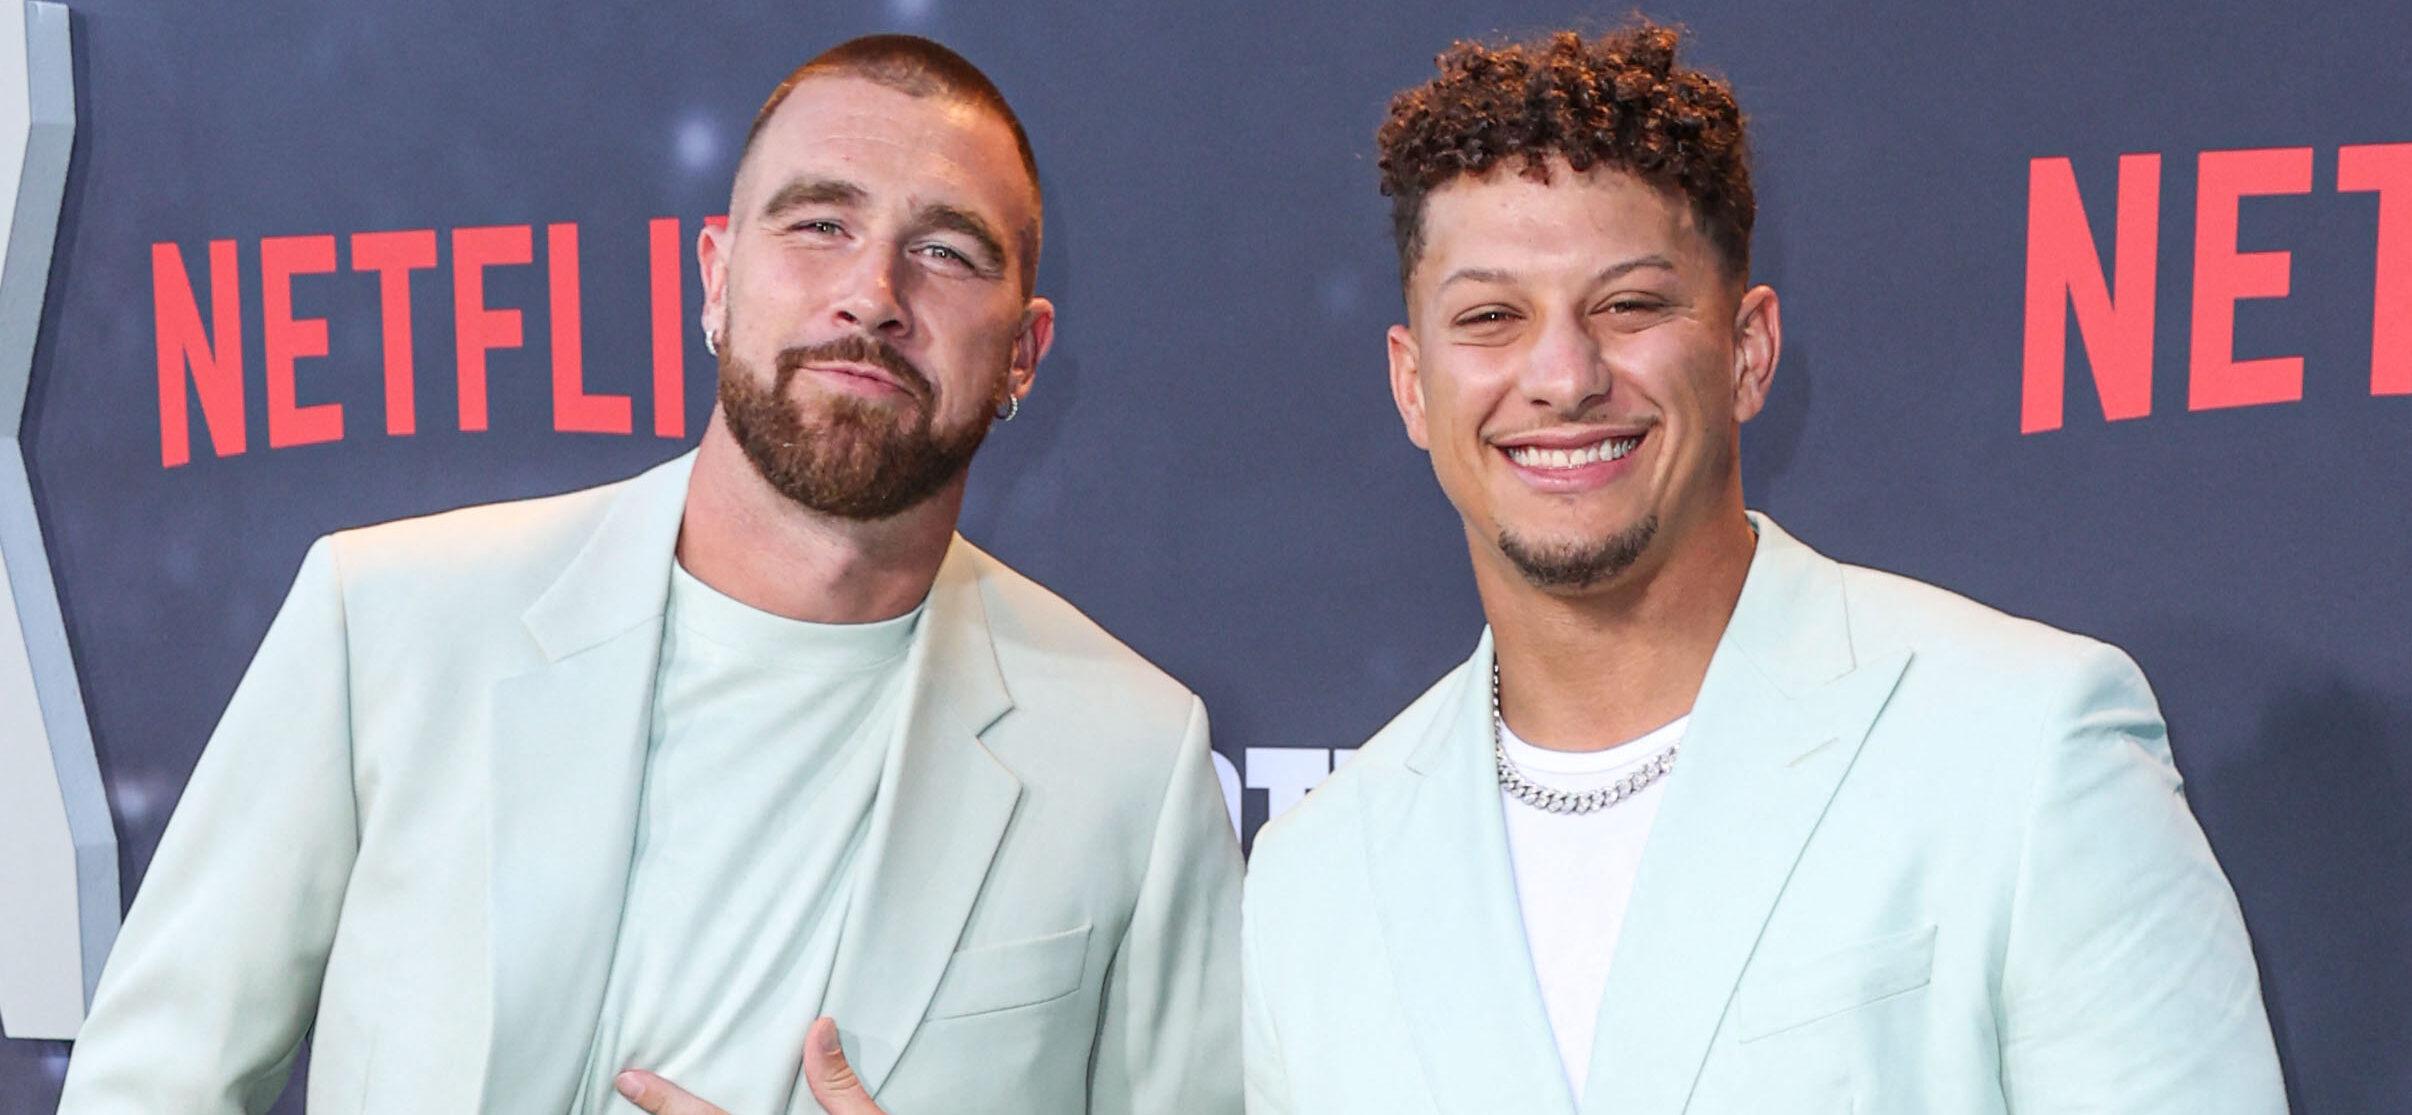 Patrick Mahomes Hosts Private Dinner For Team Following Deadly Shooting